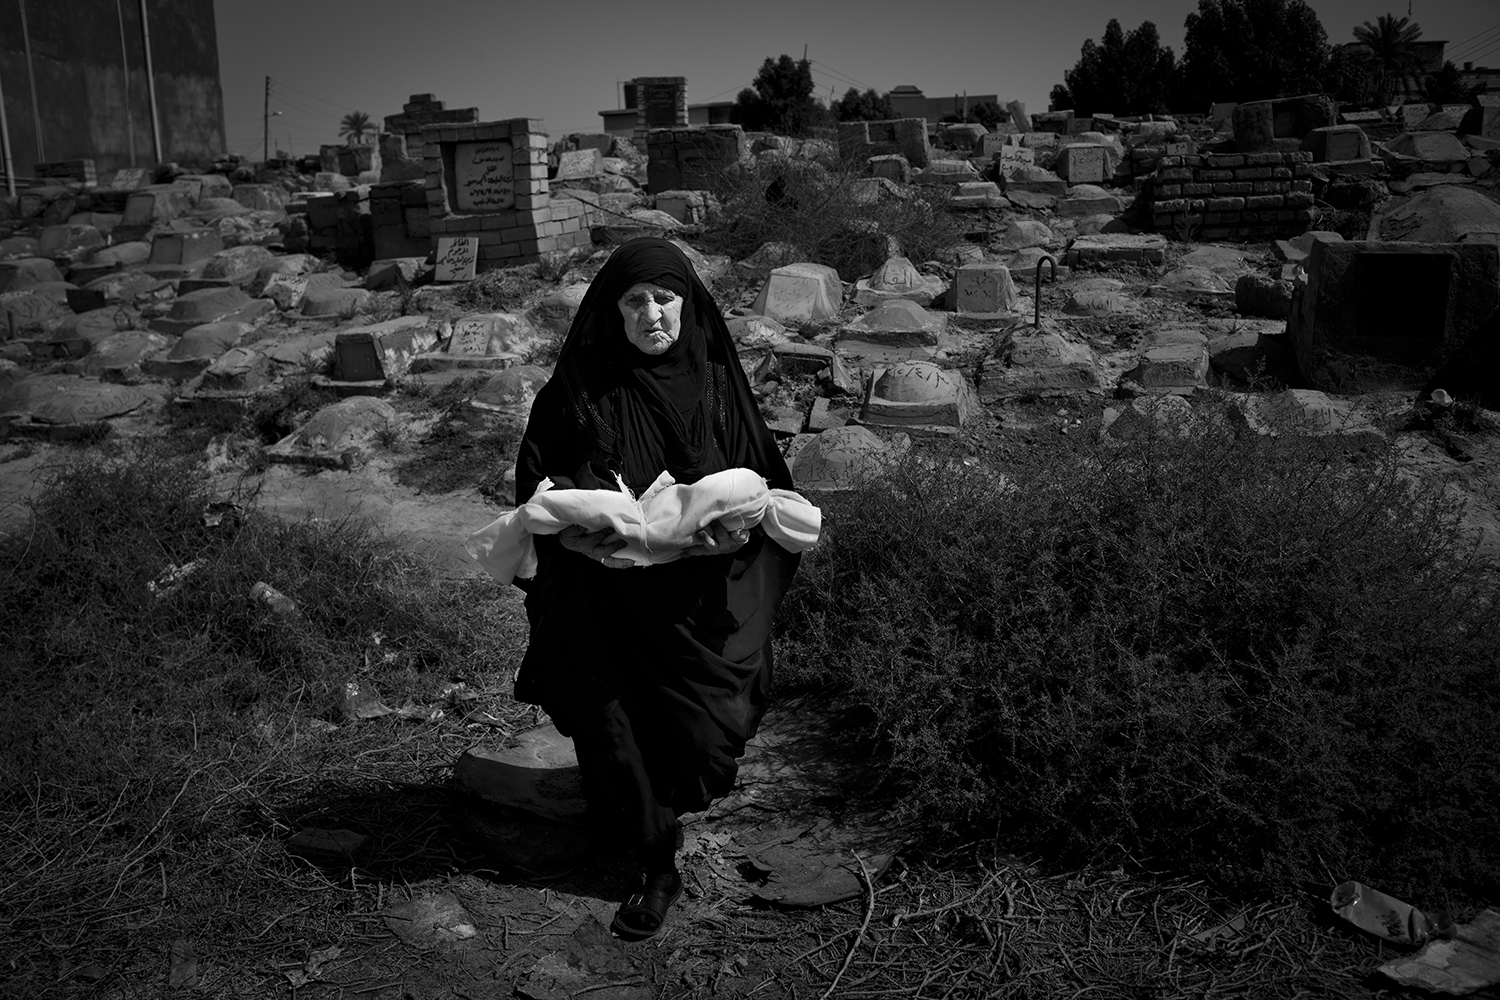 Apr. 24, 2012. Basra. An elderly woman carries the linen-wrapped body of a stillborn baby at the children’s cemetery.